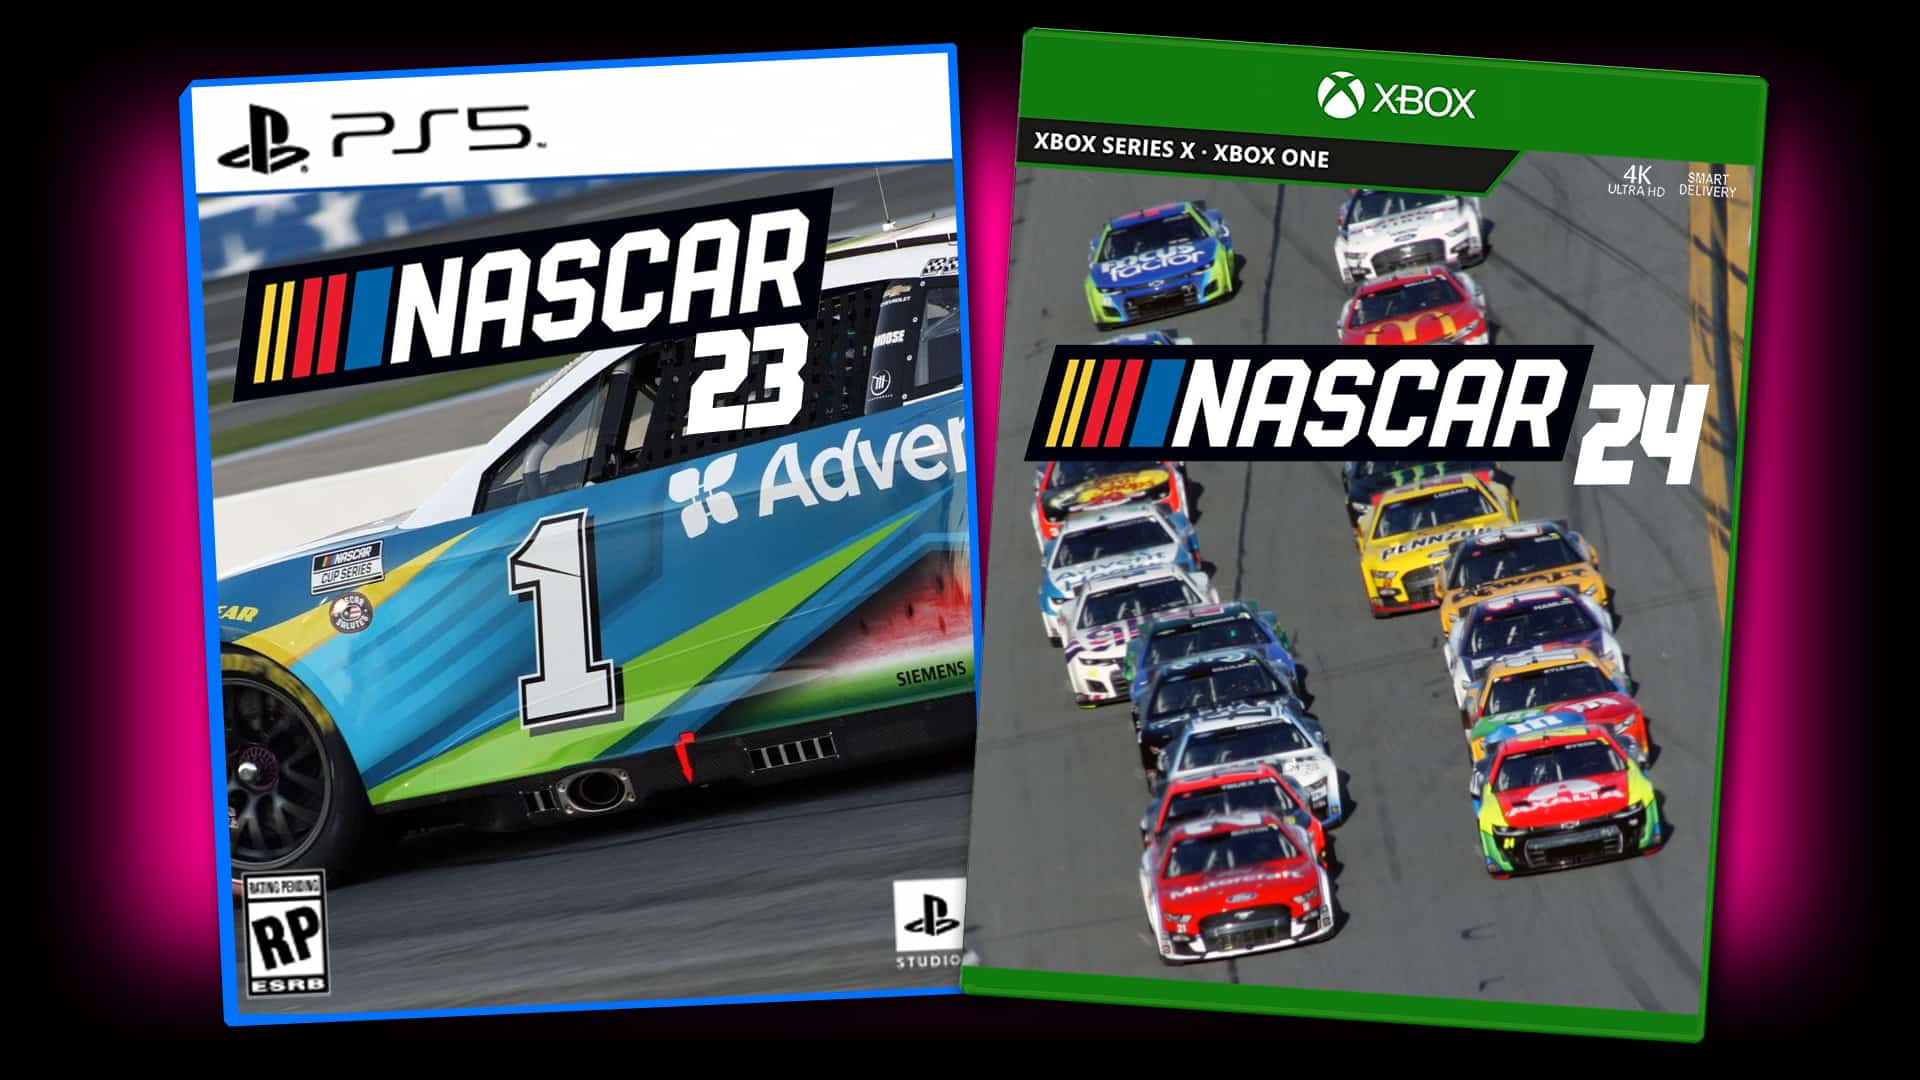 NASCAR Arcade Rush announced for PS5, Xbox Series, PS4, Xbox One